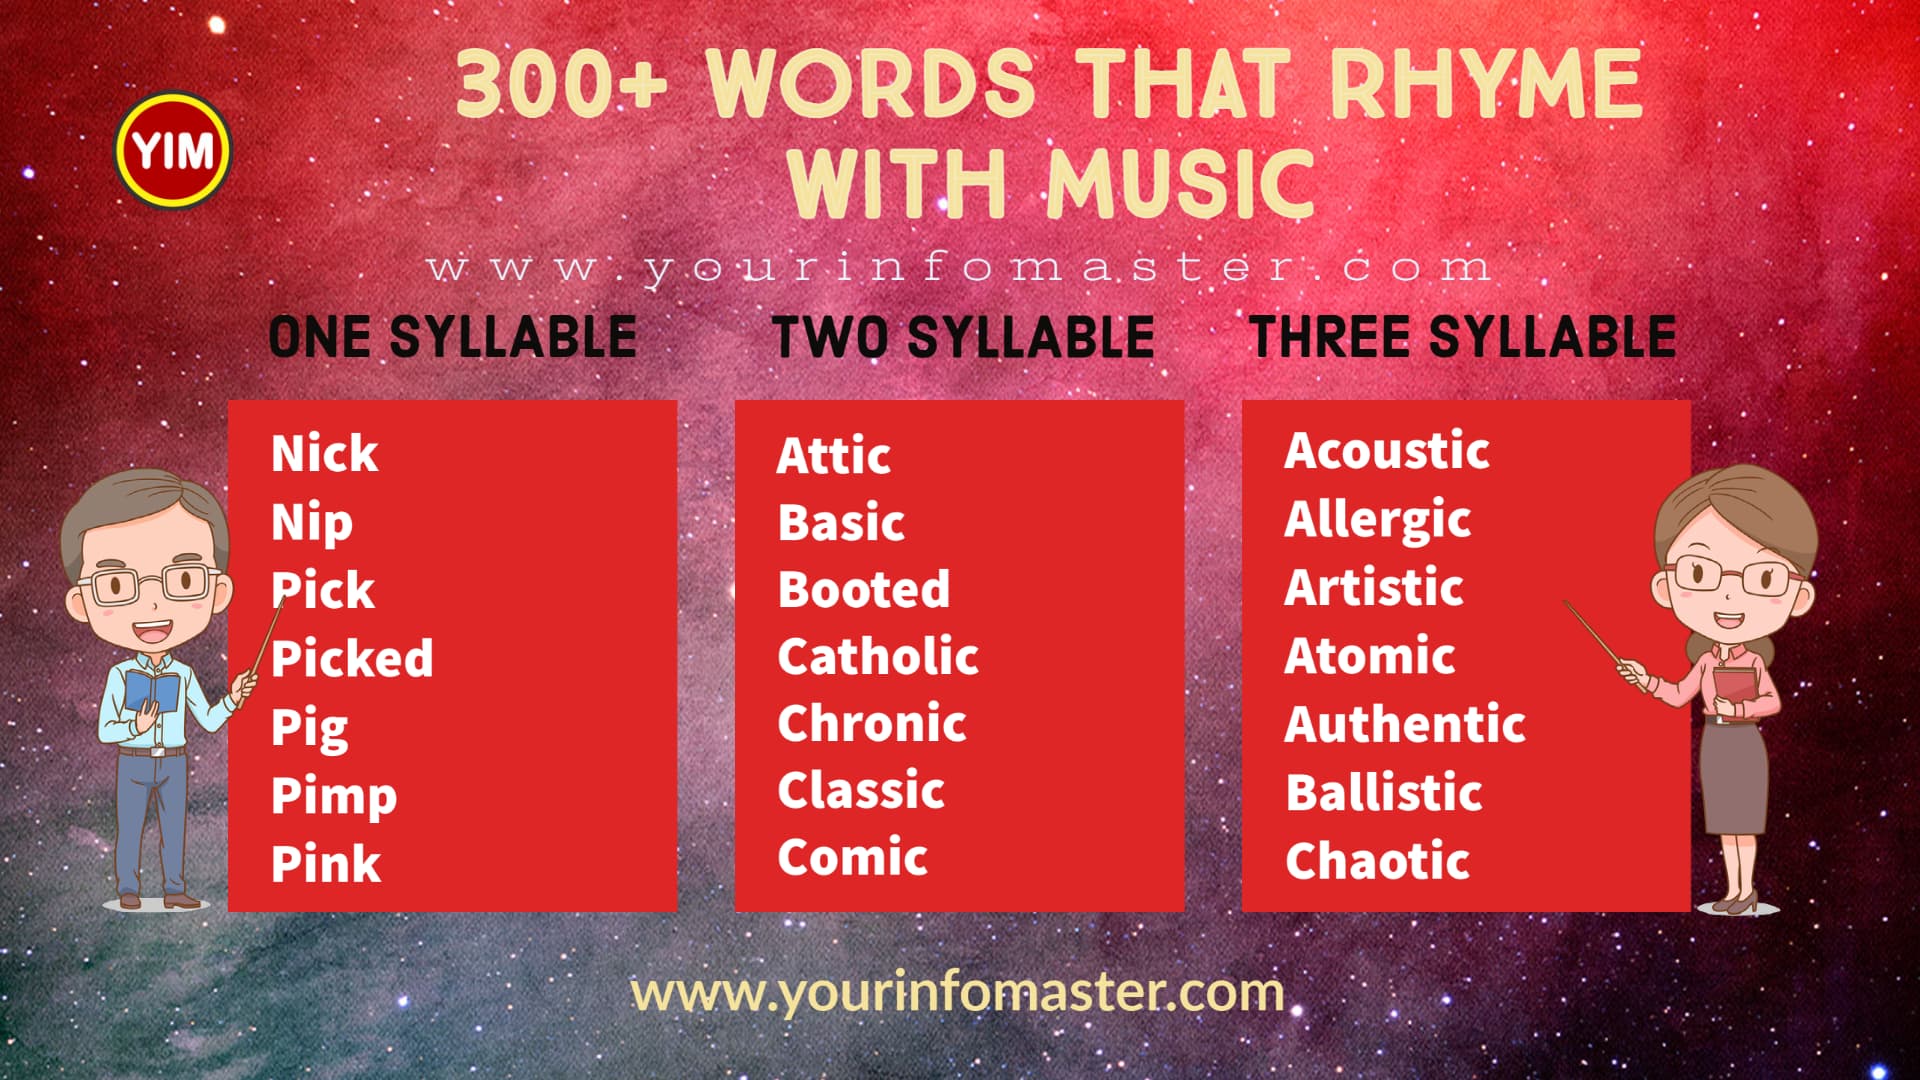 100 rhyming words, 1000 rhyming words, 200+ Interesting Words, 200+ Useful Words, 300 rhyming words list, 50 rhyming words list, 500 rhyming words, all words that rhyme with Music, Another word for Music, how to teach rhyming words, Interesting Words that Rhyme in English, Music rhyme, Music rhyme examples, Music Rhyming words, Printable Infographics, Printable Worksheets, rhymes English words, rhymes with Music infographics, rhyming pairs, Rhyming Words, Rhyming Words for Kids, rhyming words for Music, Rhyming Words List, Things that rhyme with Music, what are rhyming words, what rhymes with Music, words rhyming with Music, Words that Rhyme, Words That Rhyme with Music